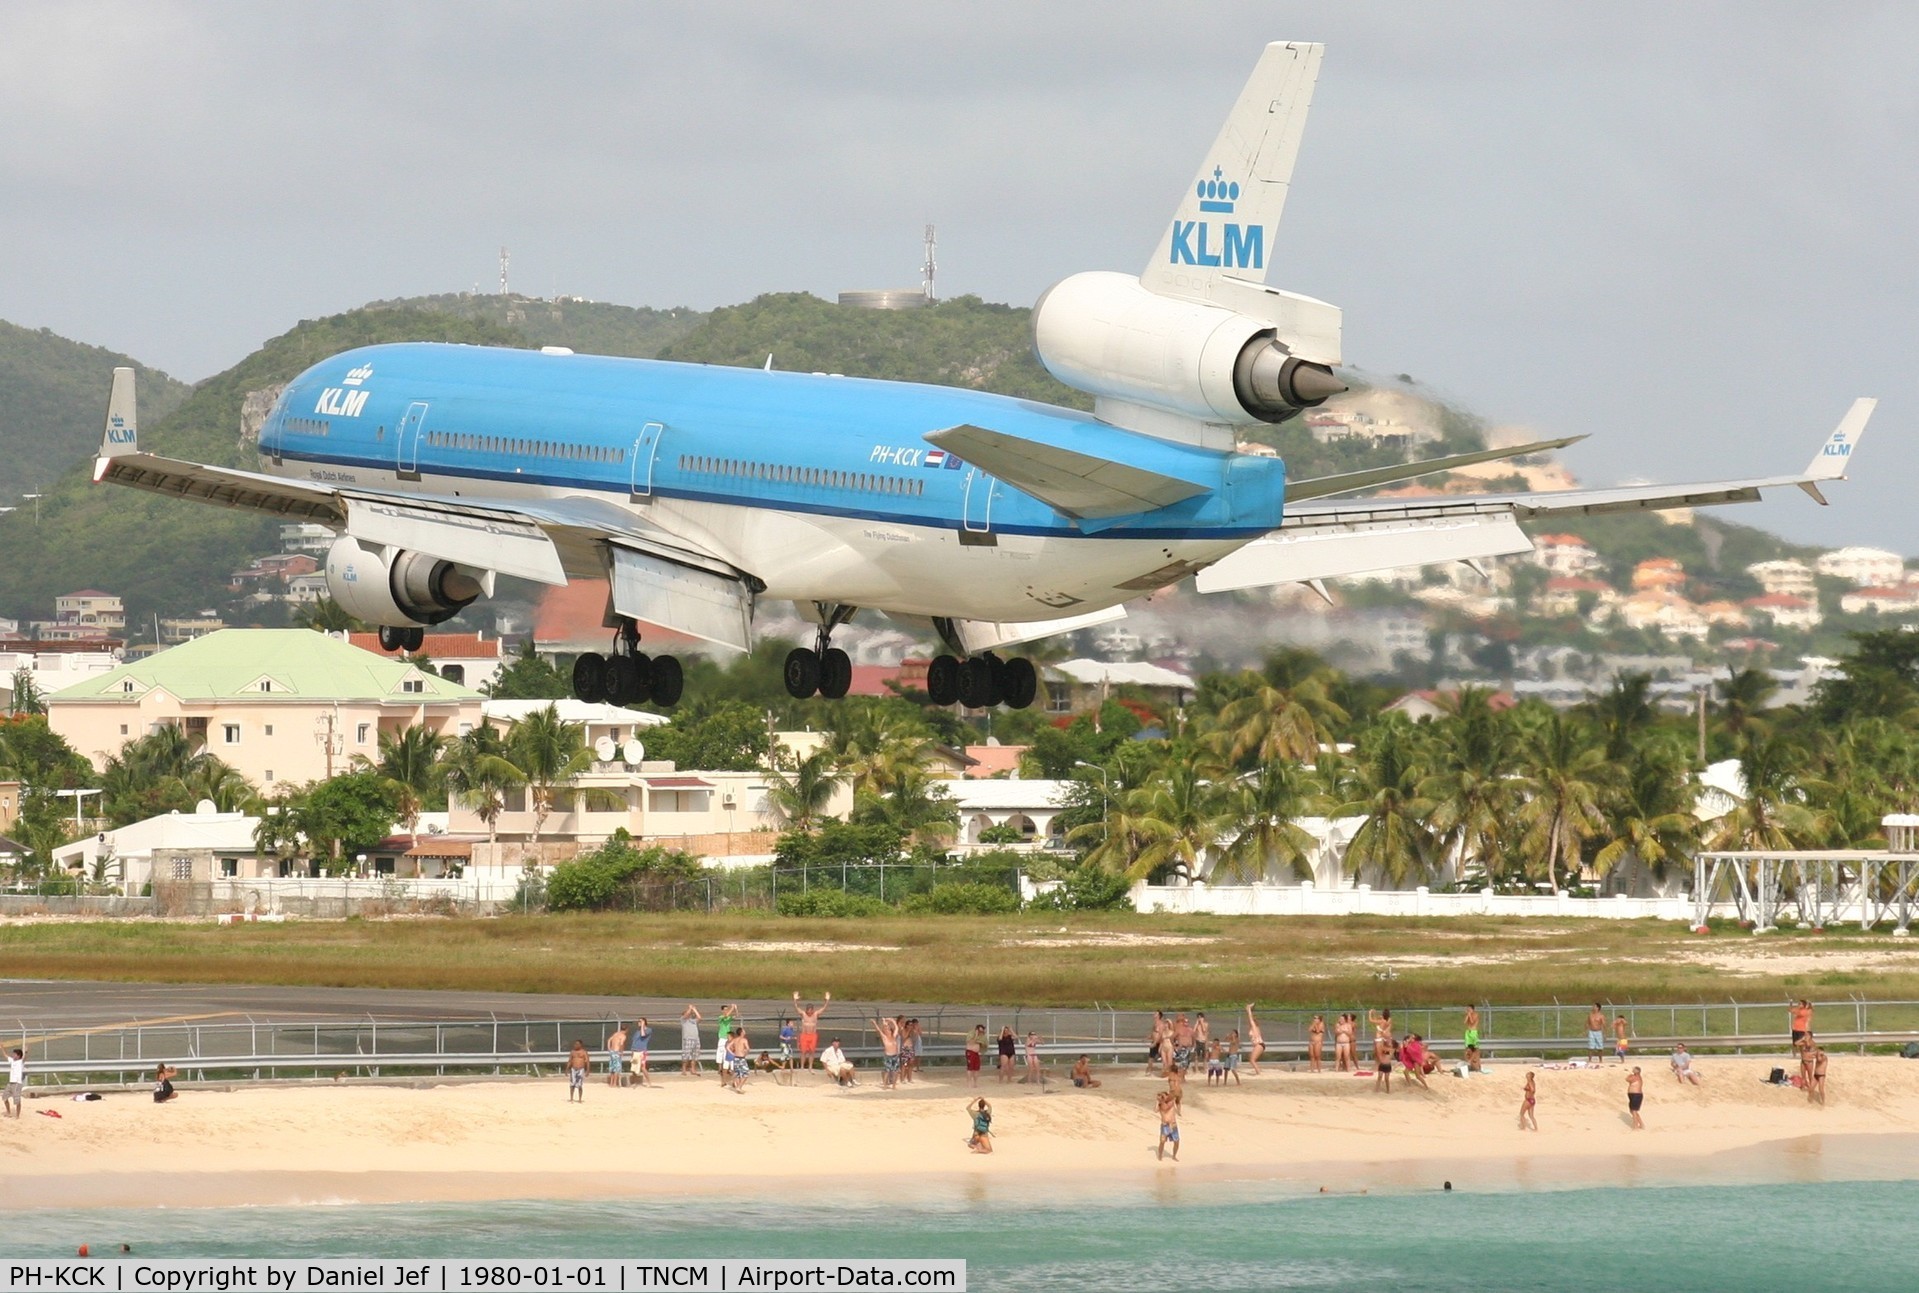 PH-KCK, 1997 McDonnell Douglas MD-11 C/N 48564, KLM PH-KCK over Maho beach at TNCM for runway 10